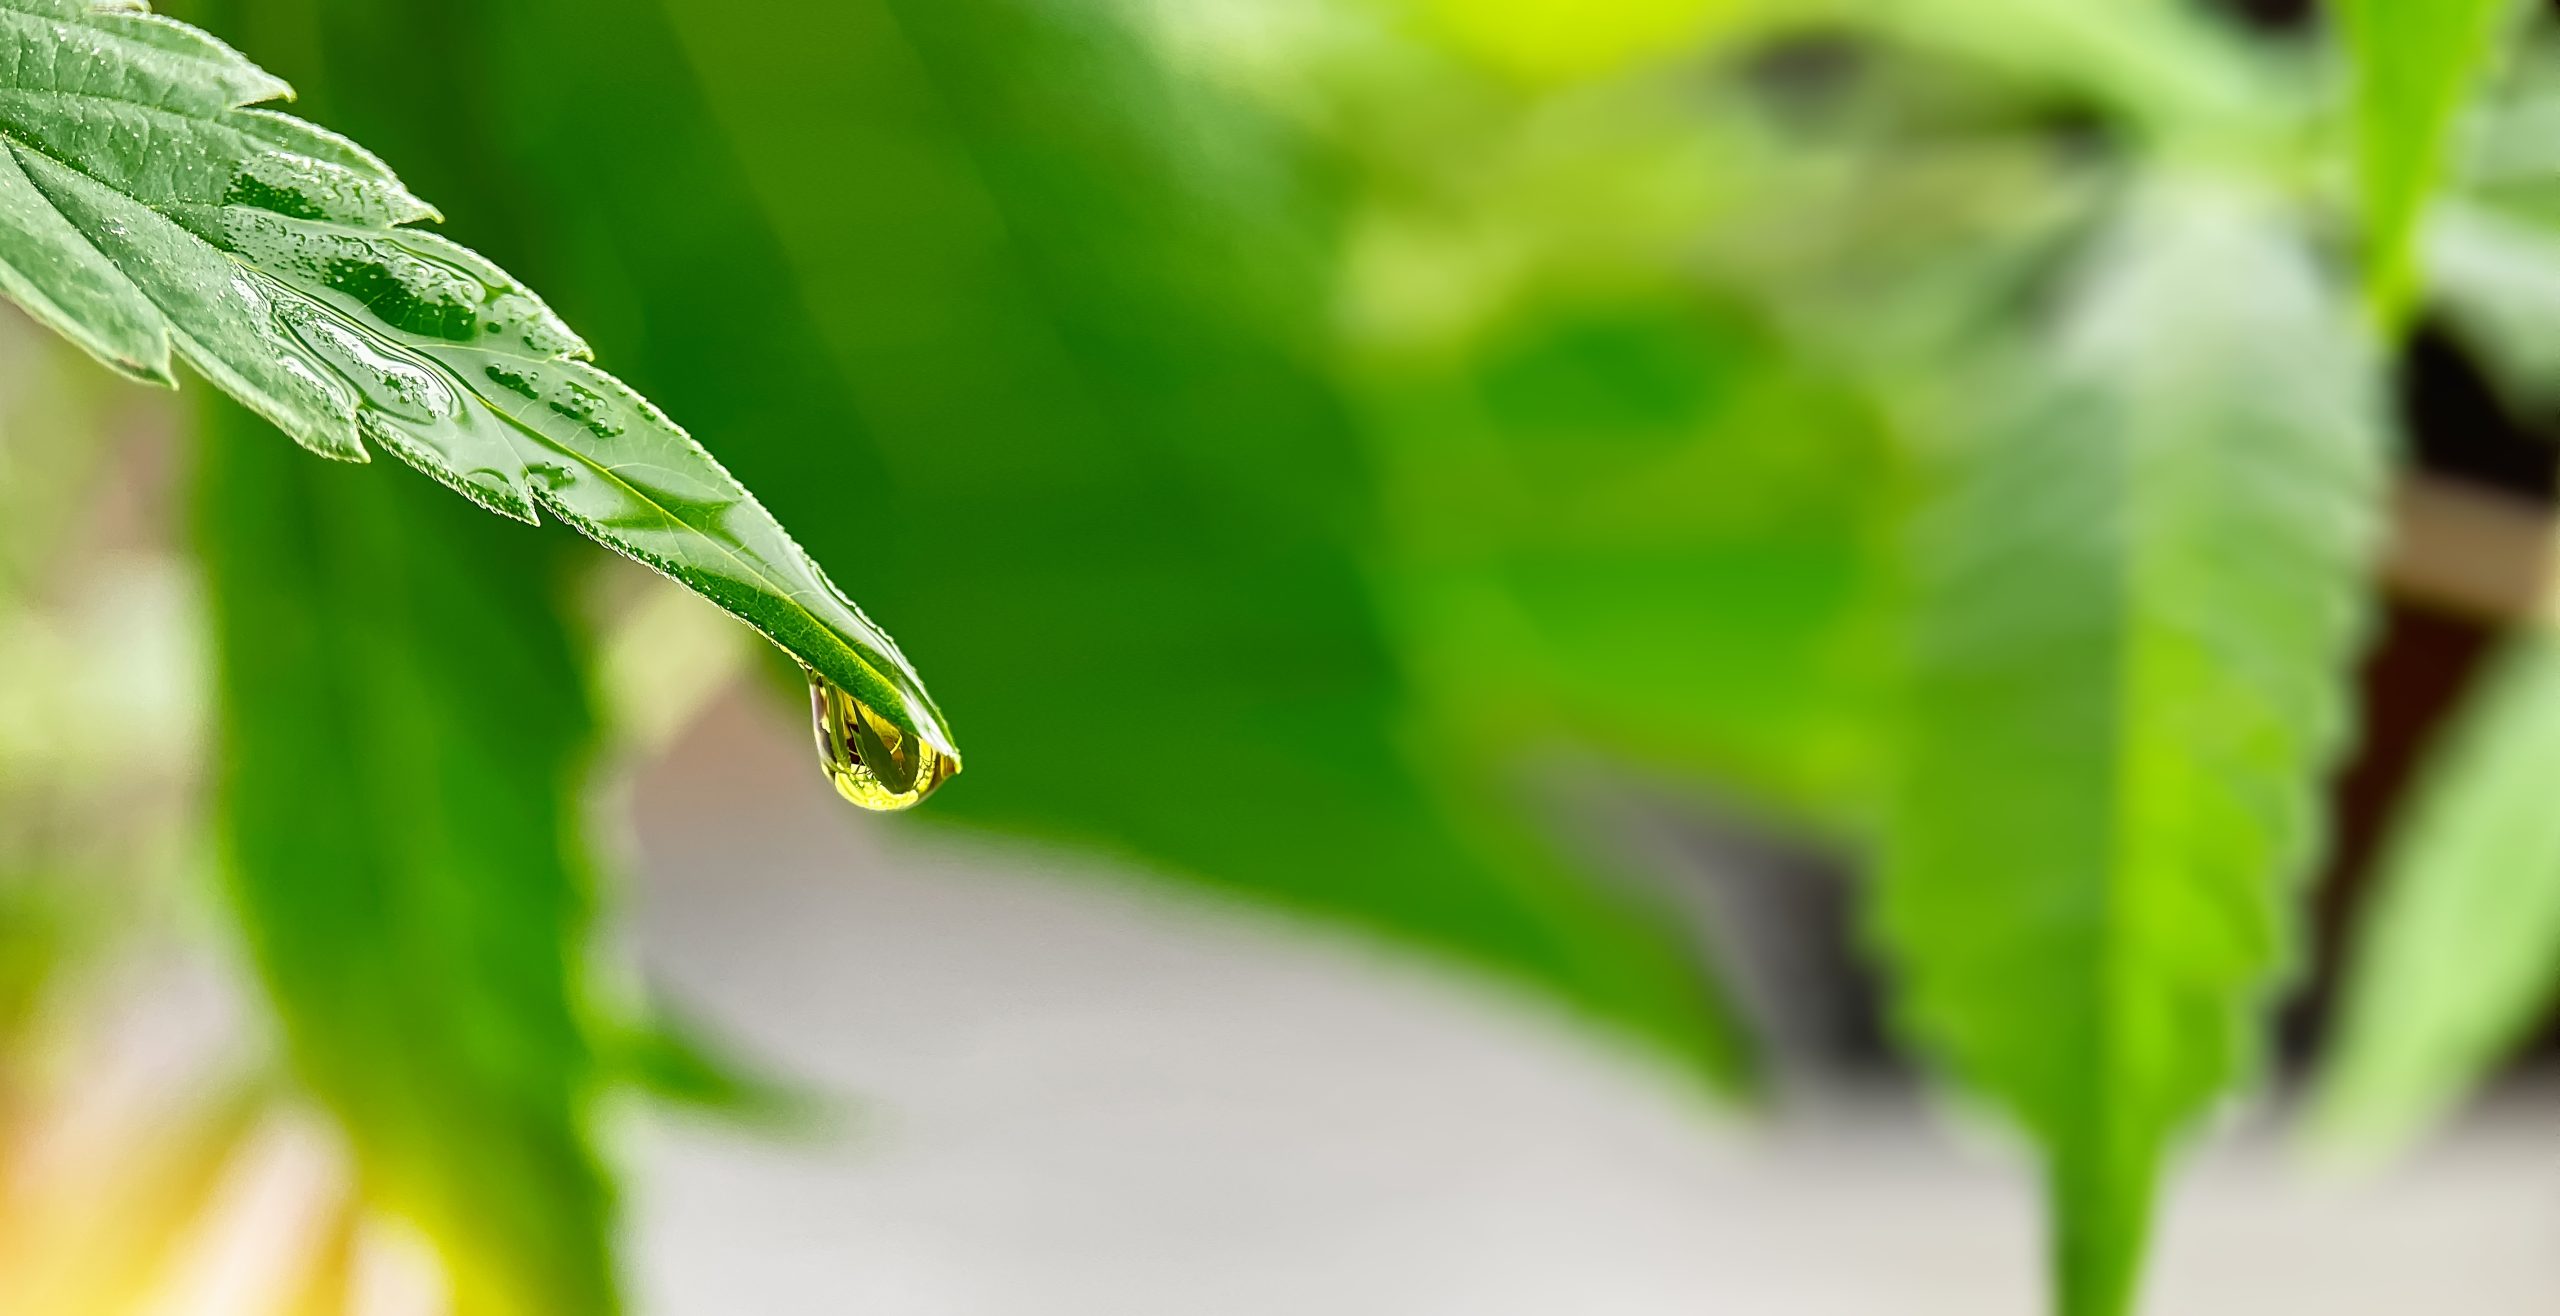 Close-up of hemp plant with CBD oil dripping off leaf.